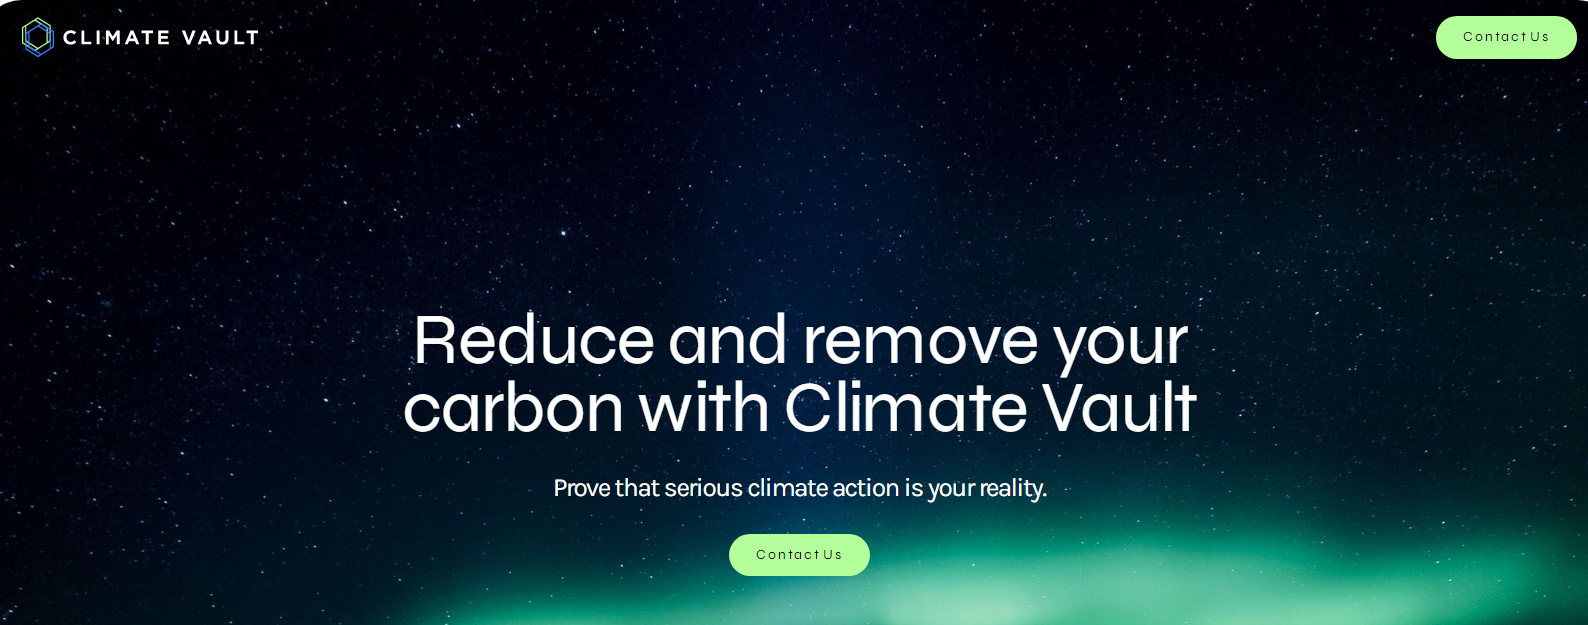 Climate Vault Secures $9.4 Million in Series A Funding Led by King Philanthropies